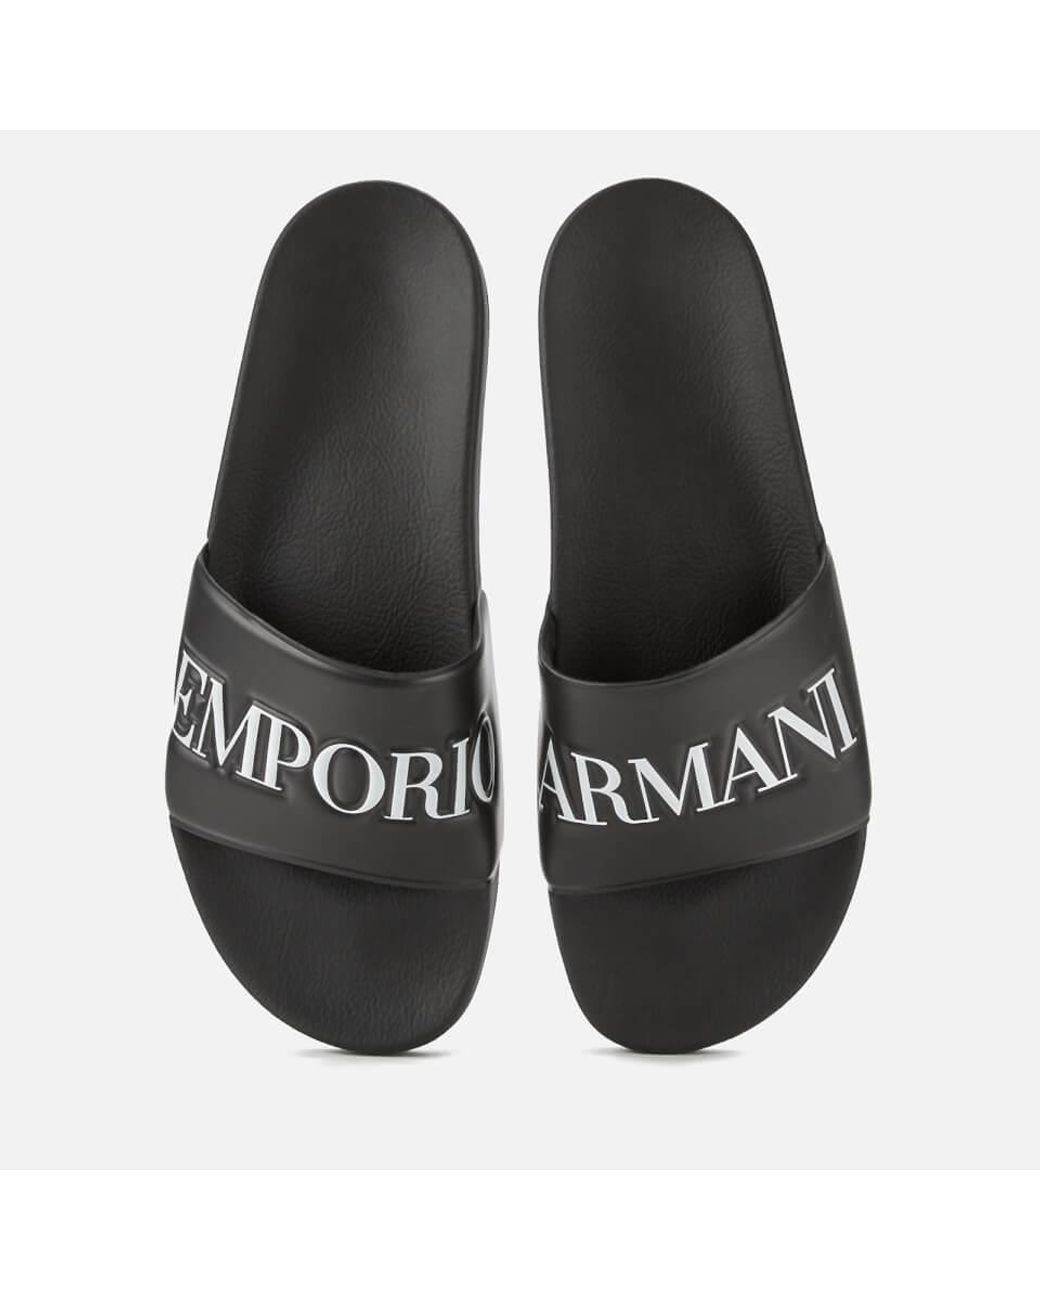 Emporio Armani Synthetic Slide Sandals in Black for Men - Lyst